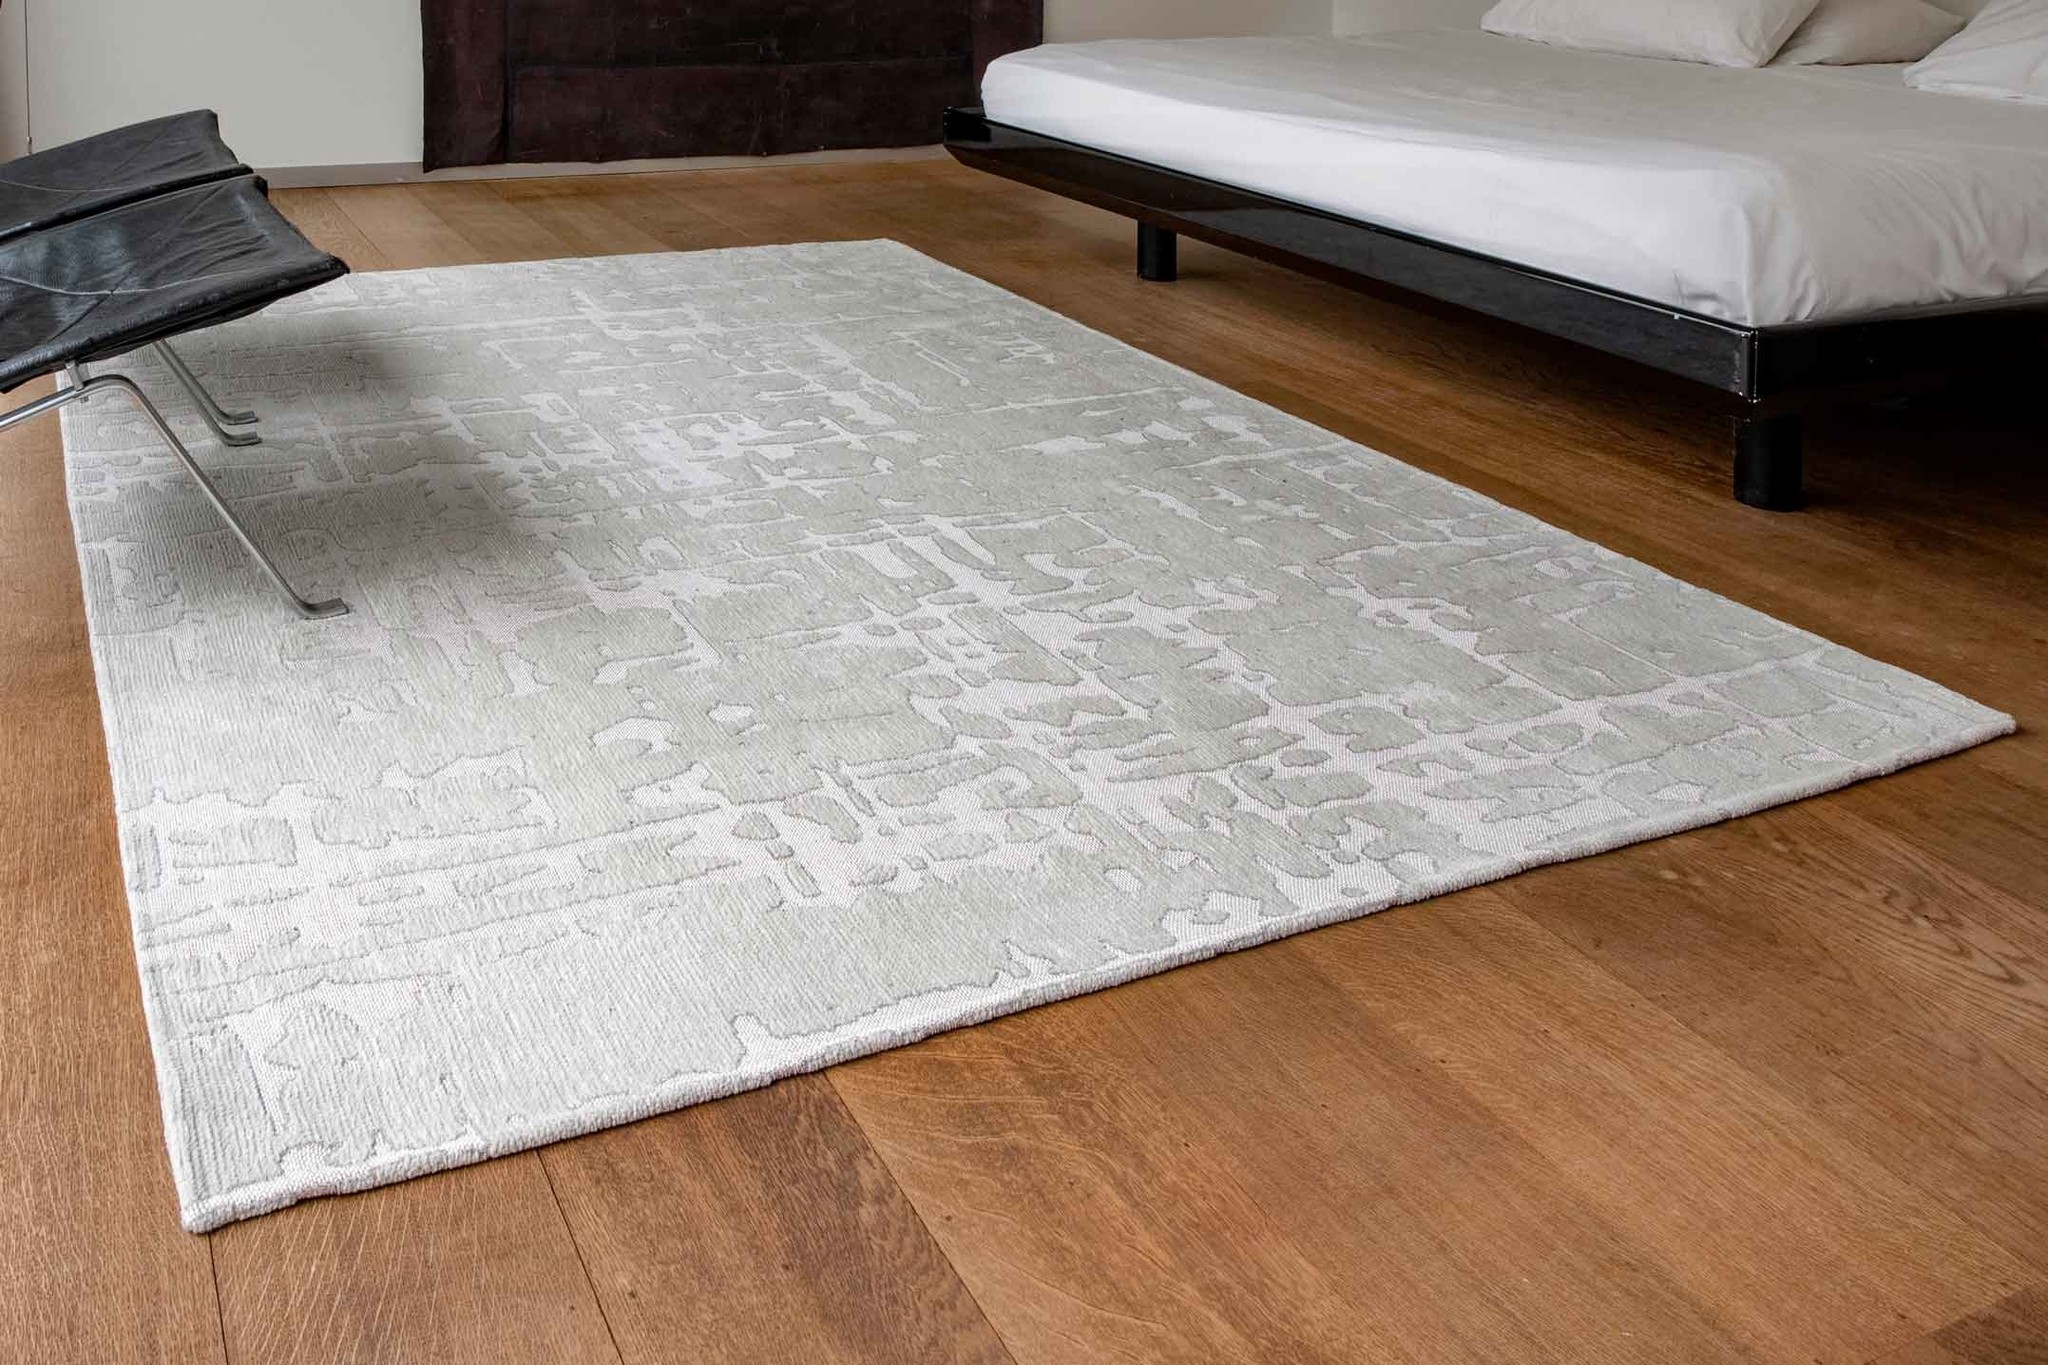 Abstract Silver Belgian Rug ☞ Size: 5' 7" x 8' (170 x 240 cm)